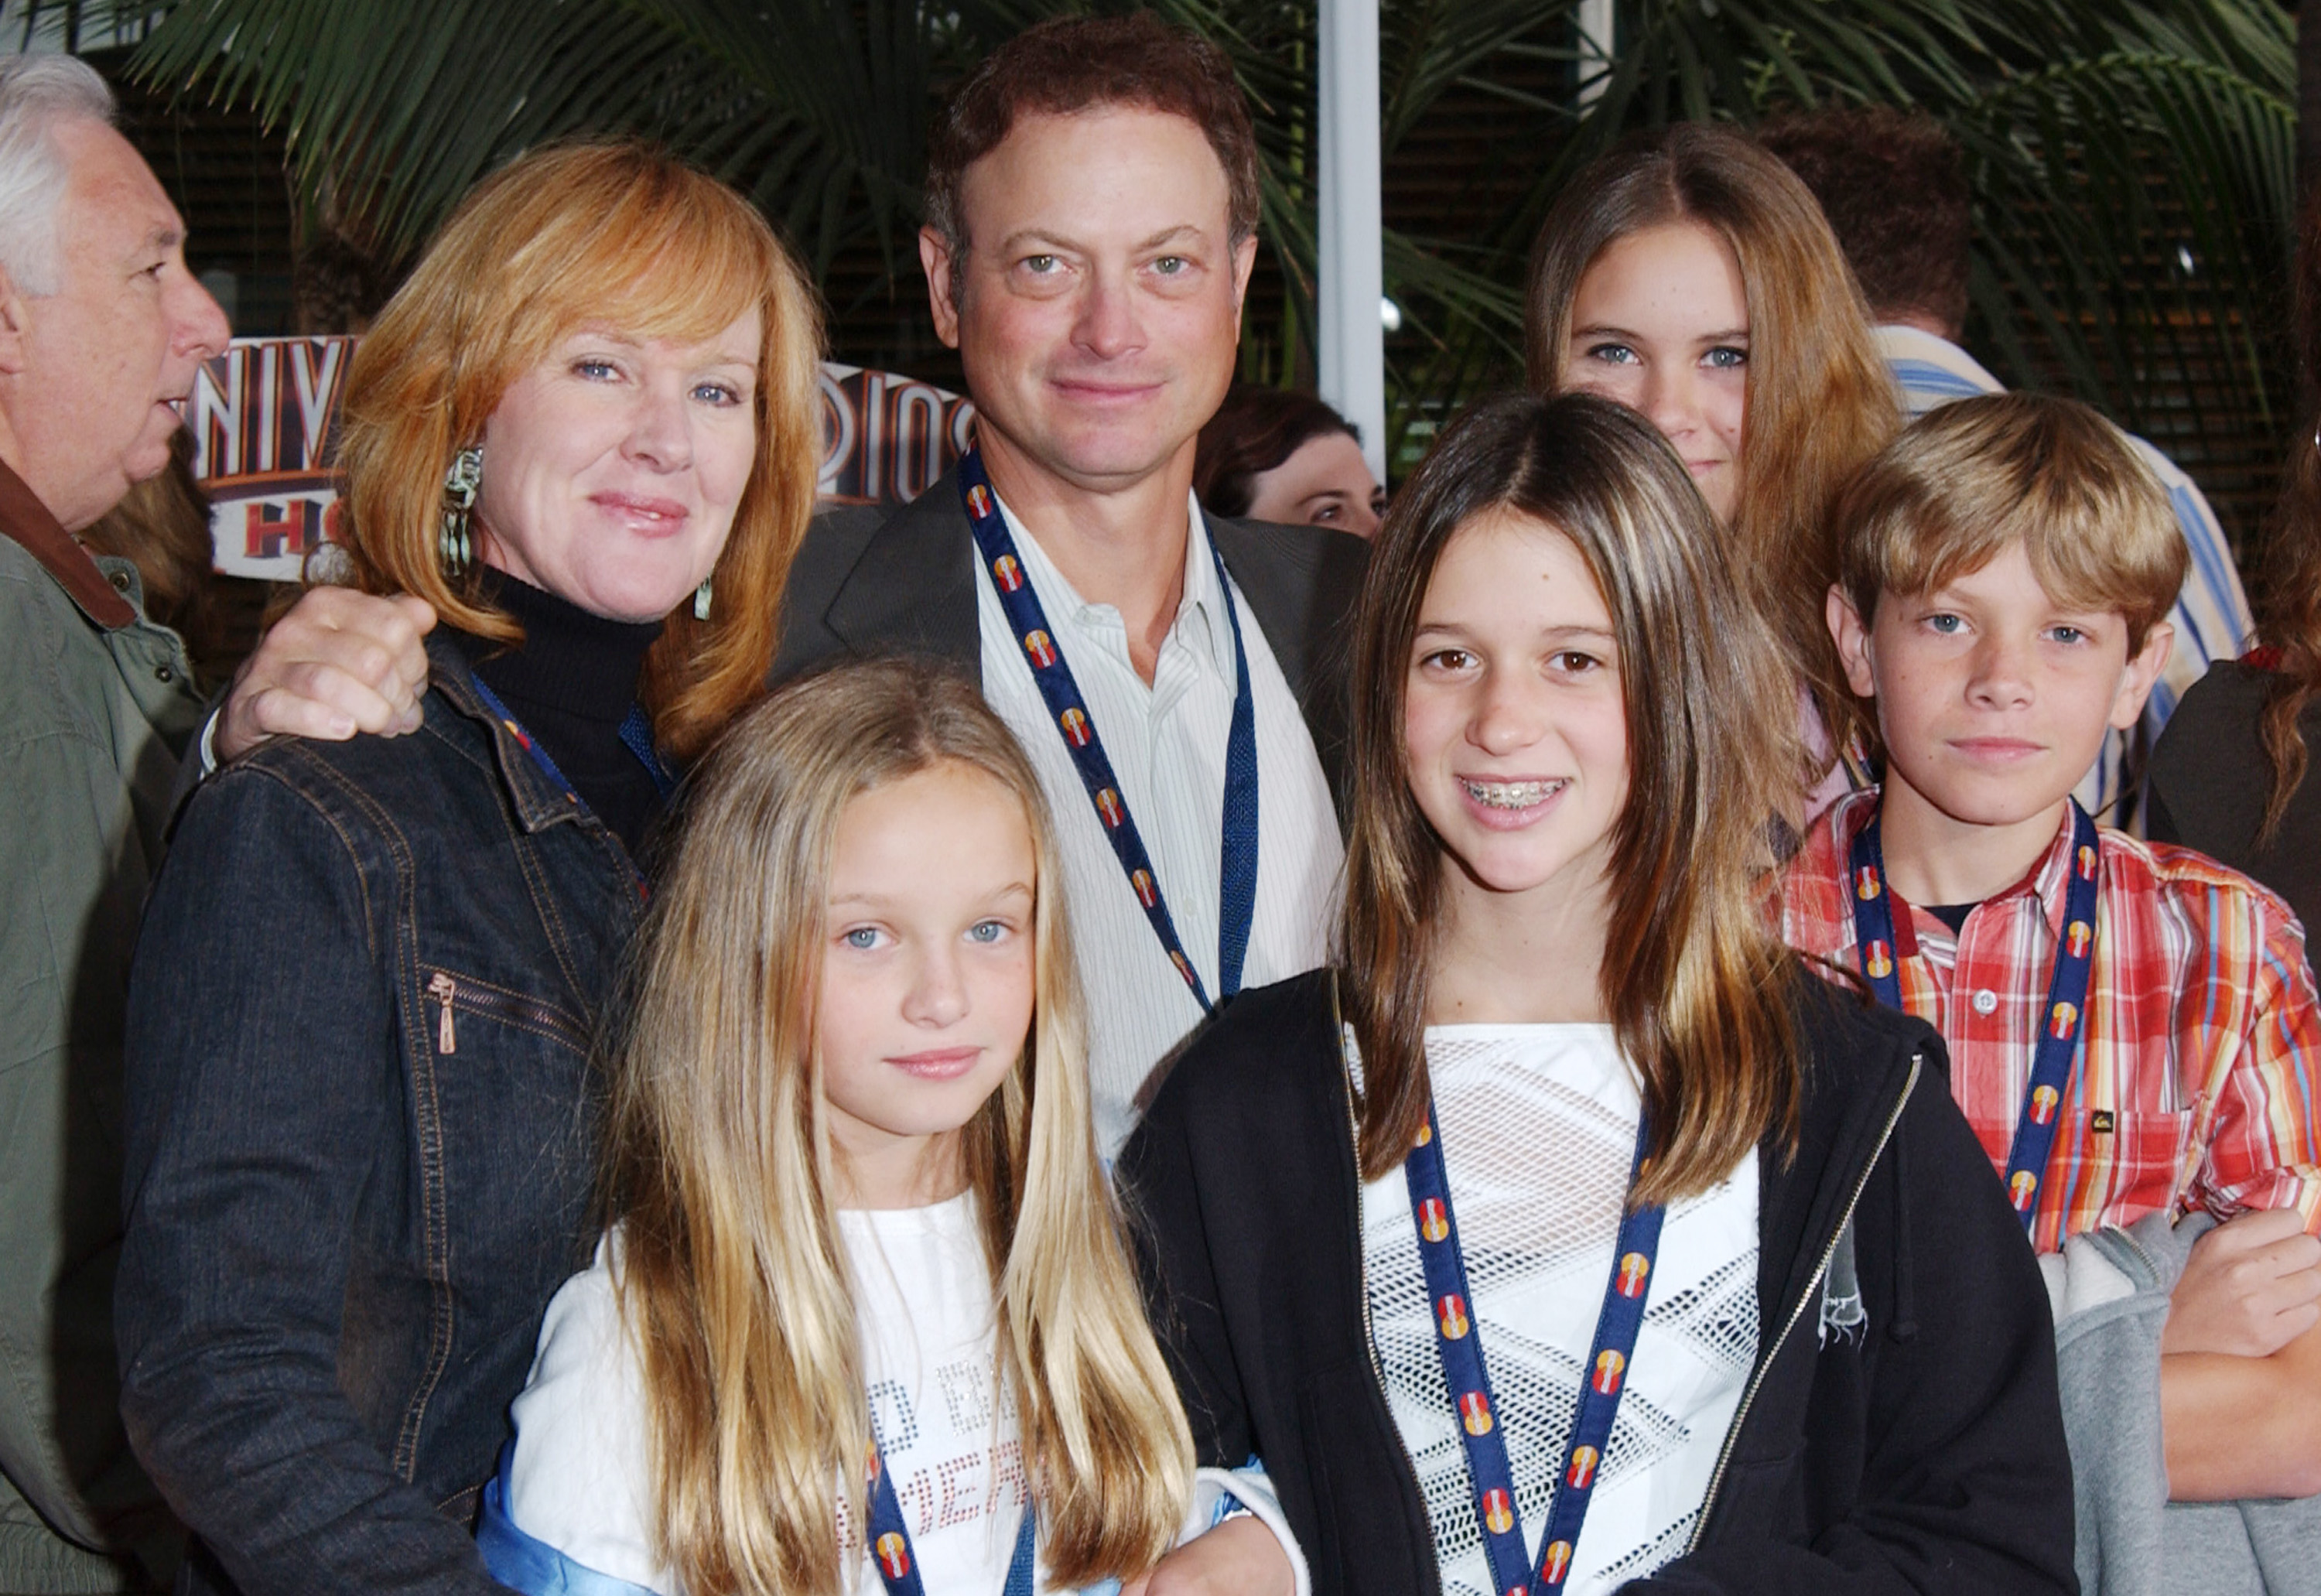 Moira Harris and Gary Sinise (center) with family during World Premiere of "The Cat In The Hat" at Universal Studios Cinemas in Hollywood, California, on November 8, 2003. | Source: Getty Images